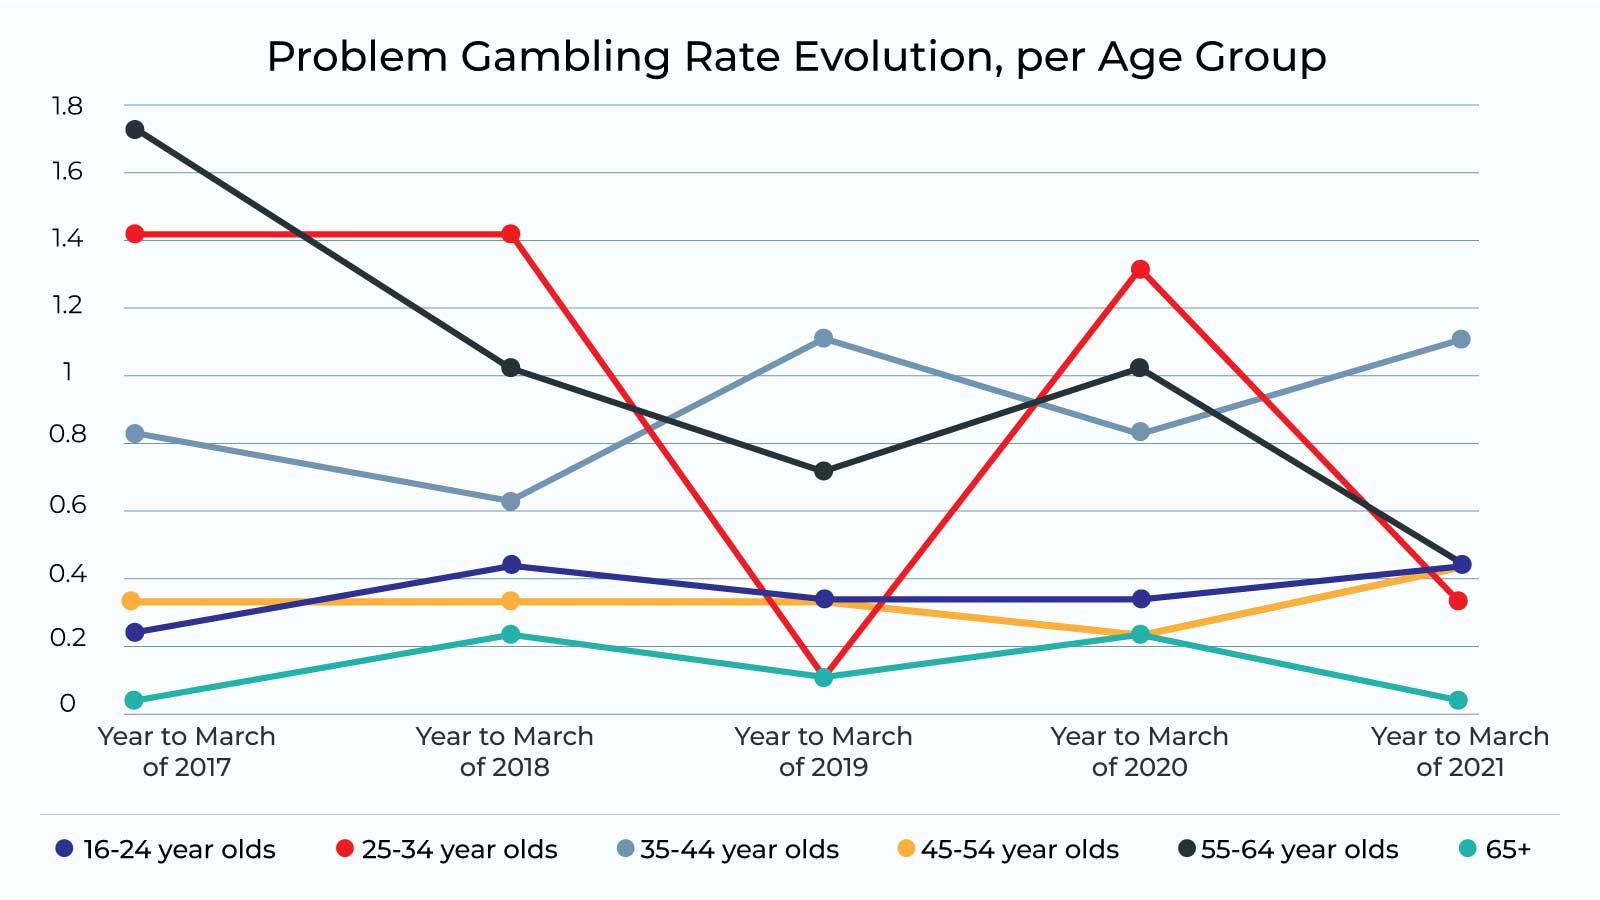 Risk gambling occurrences greatly vary across age groups